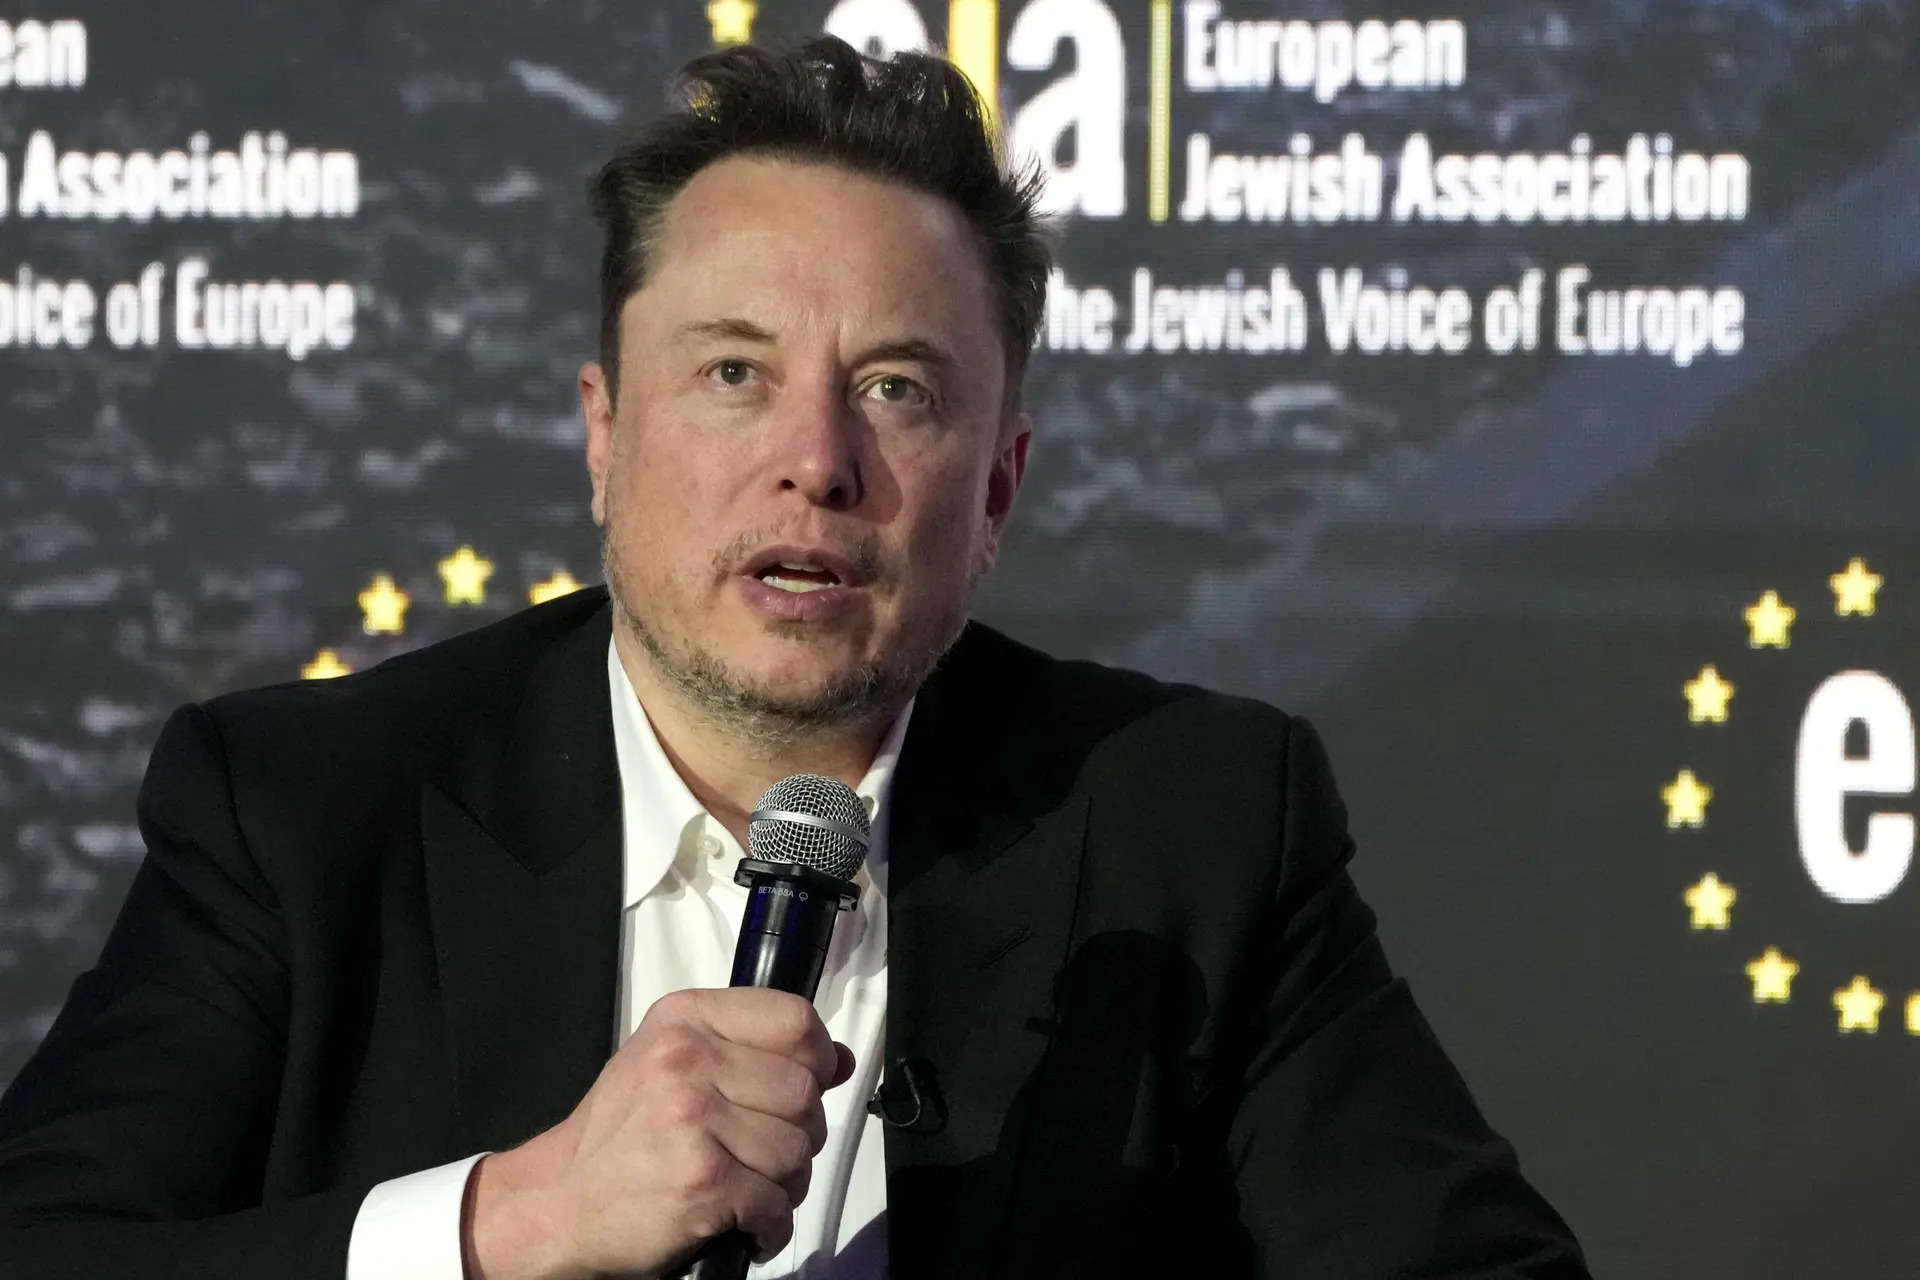 Does Elon Musk’s controversial profile picture undermine his call to defend christianity? 